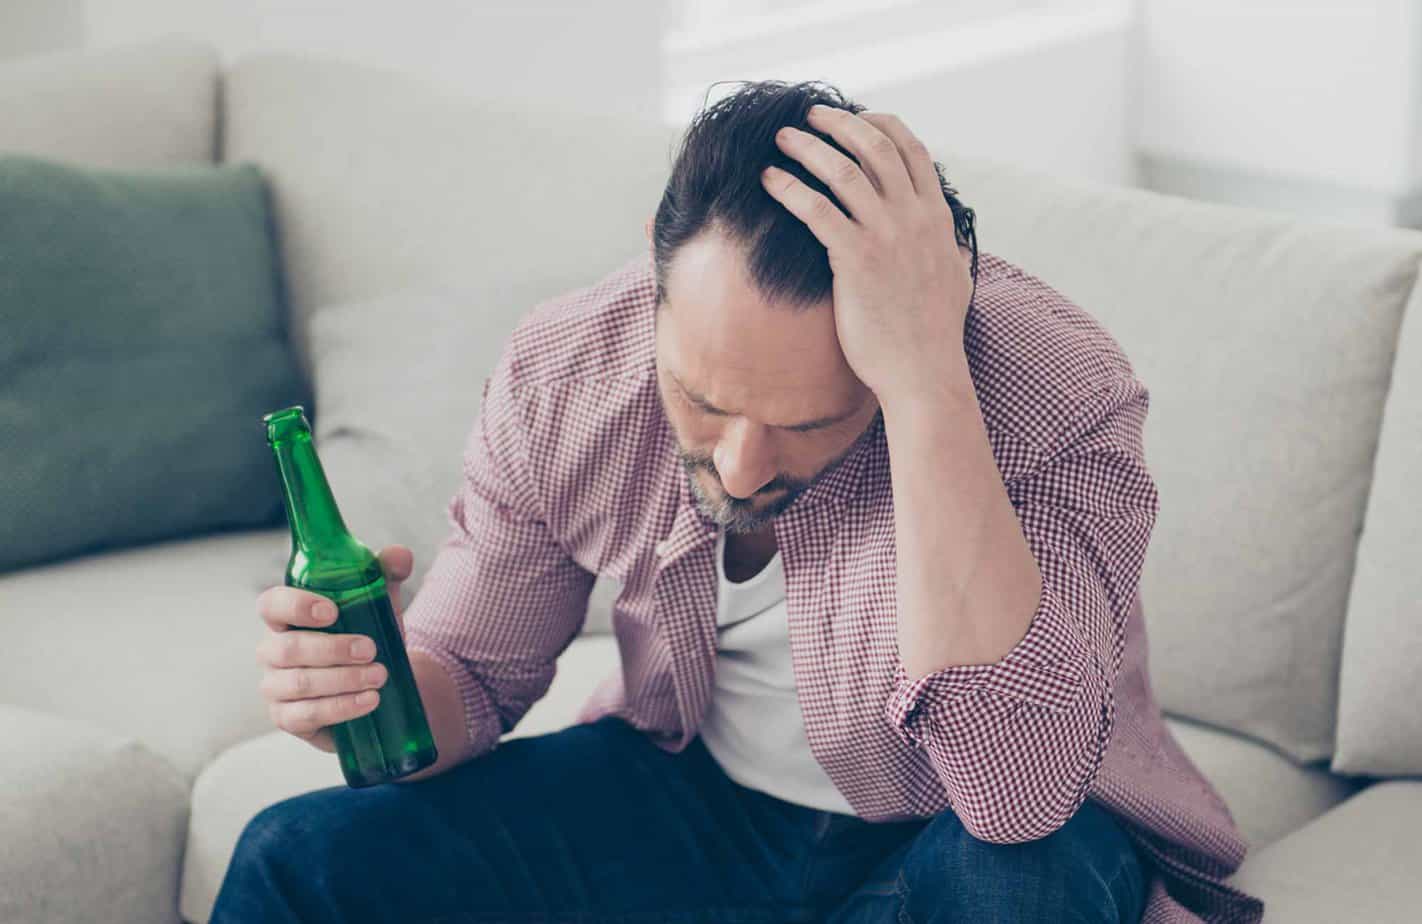 Could Anxiety Be Causing You to Drink?